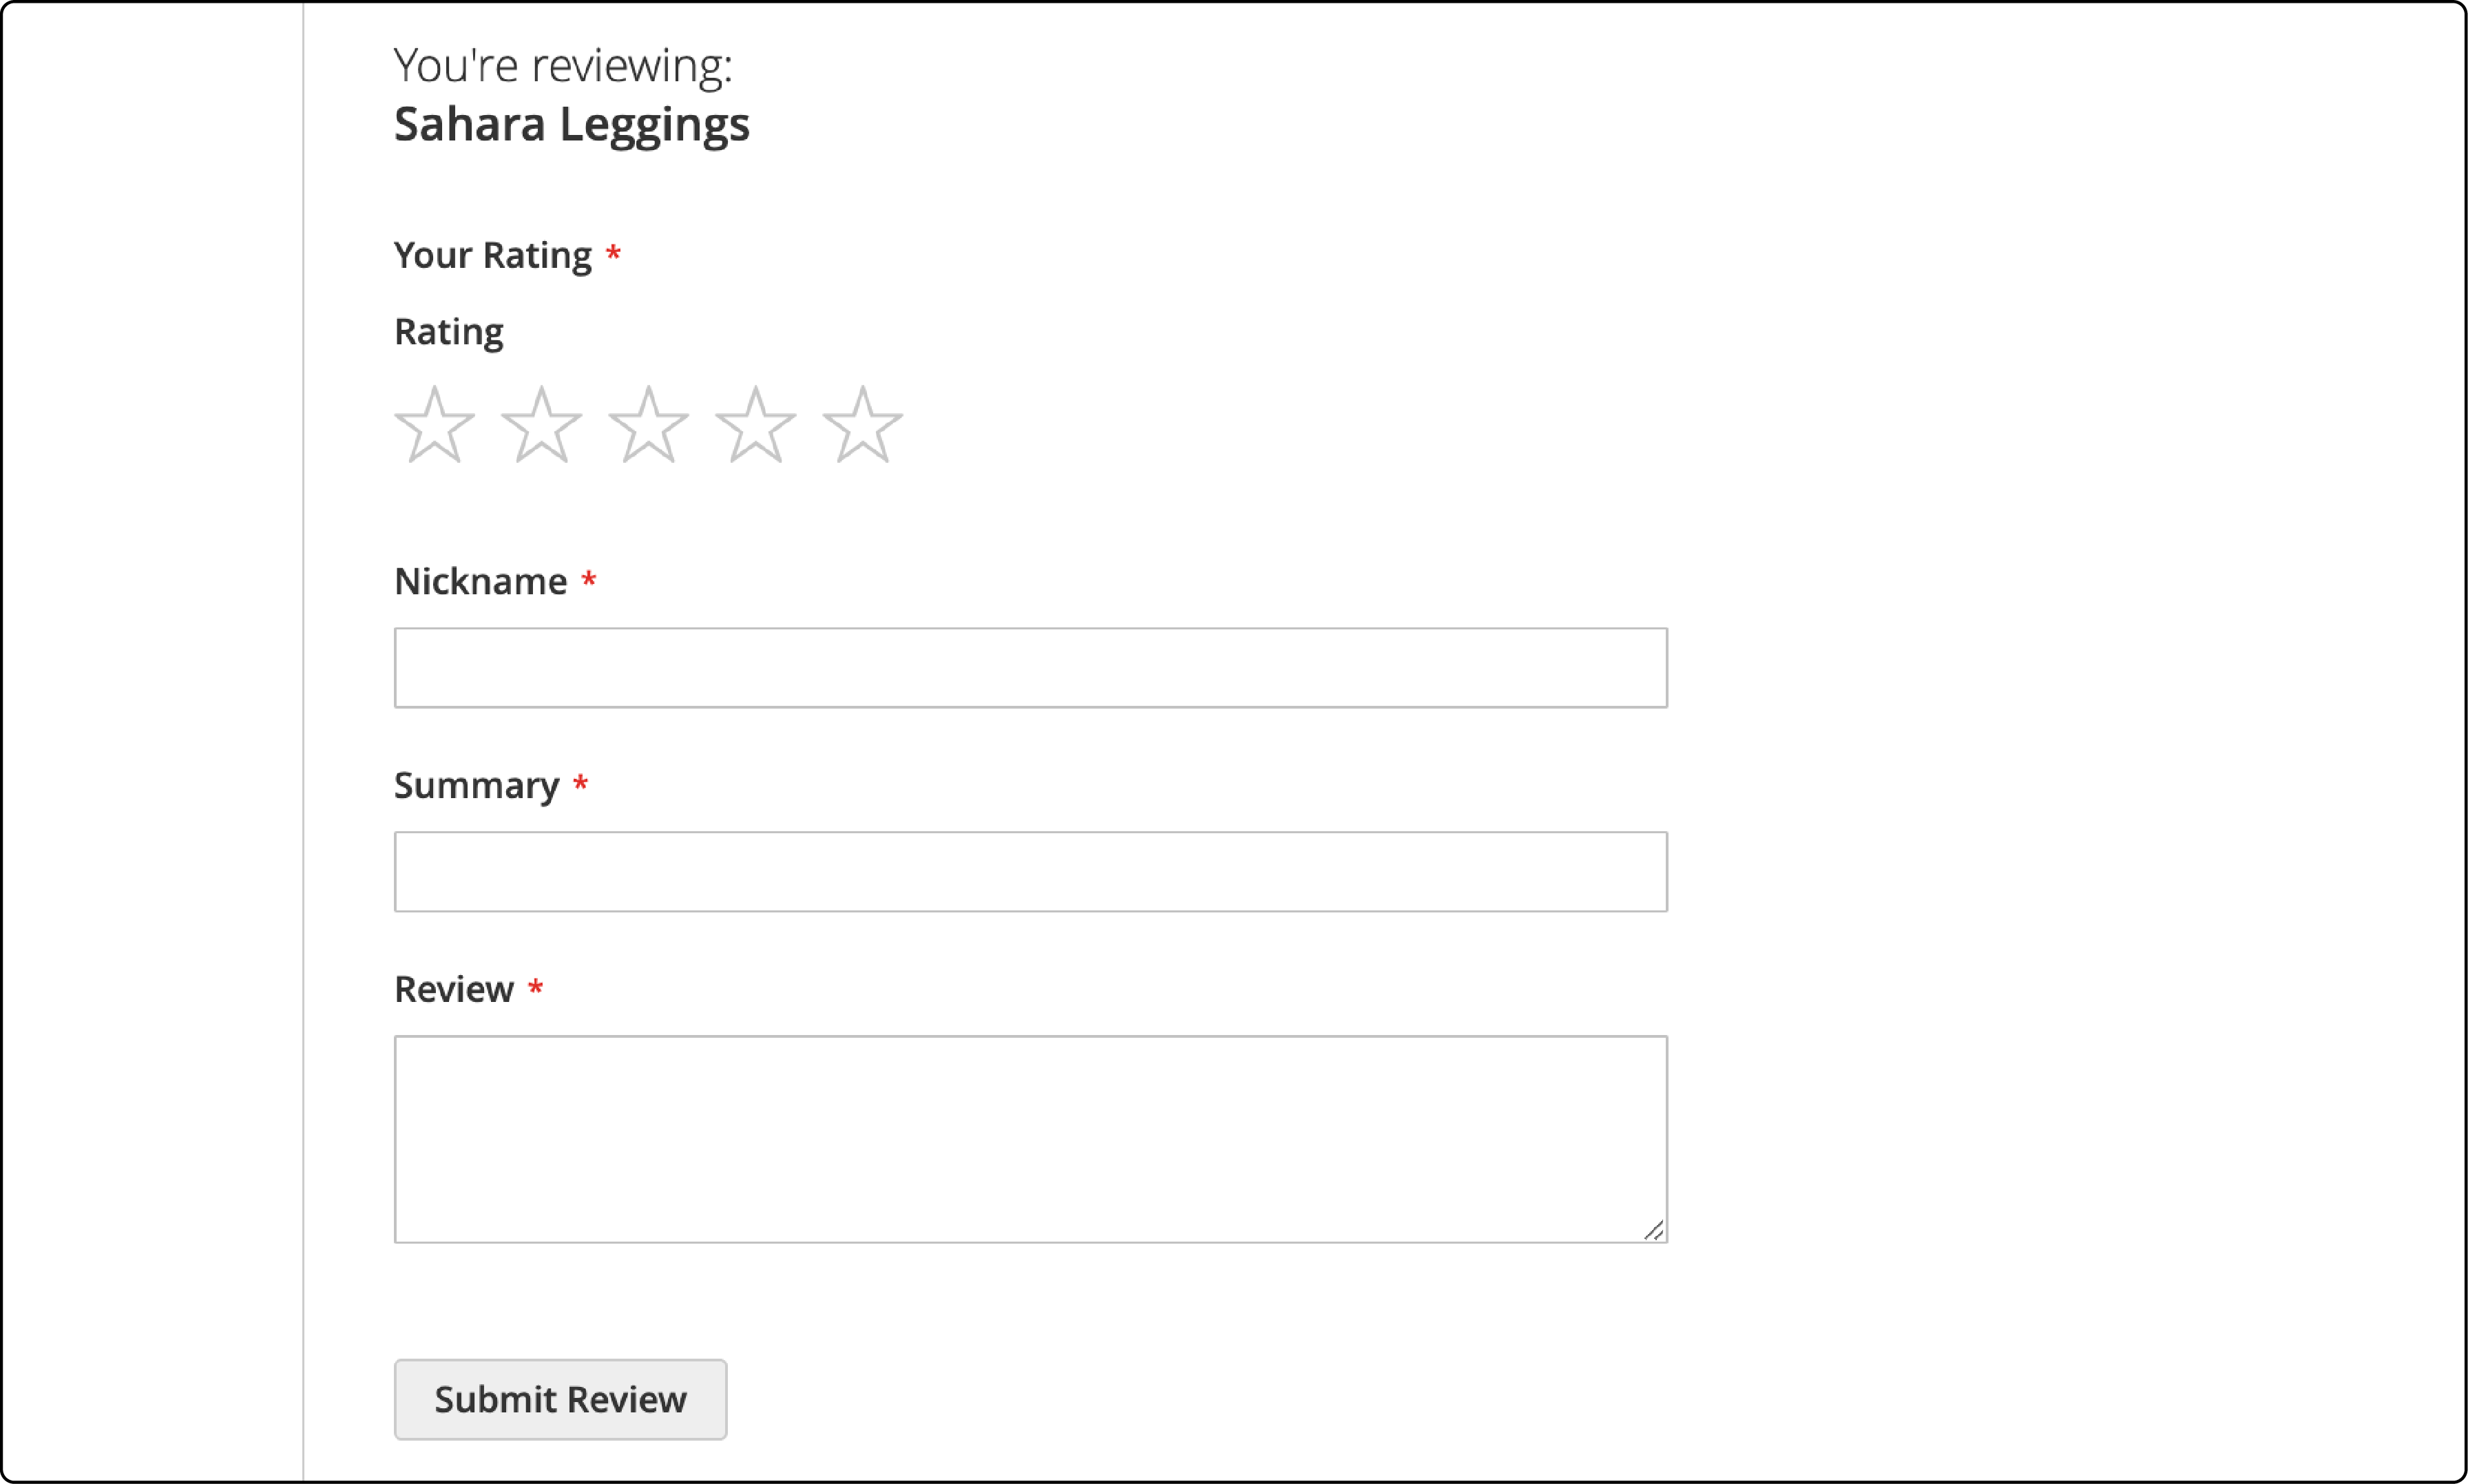 Collecting and displaying customer reviews on an ecommerce site